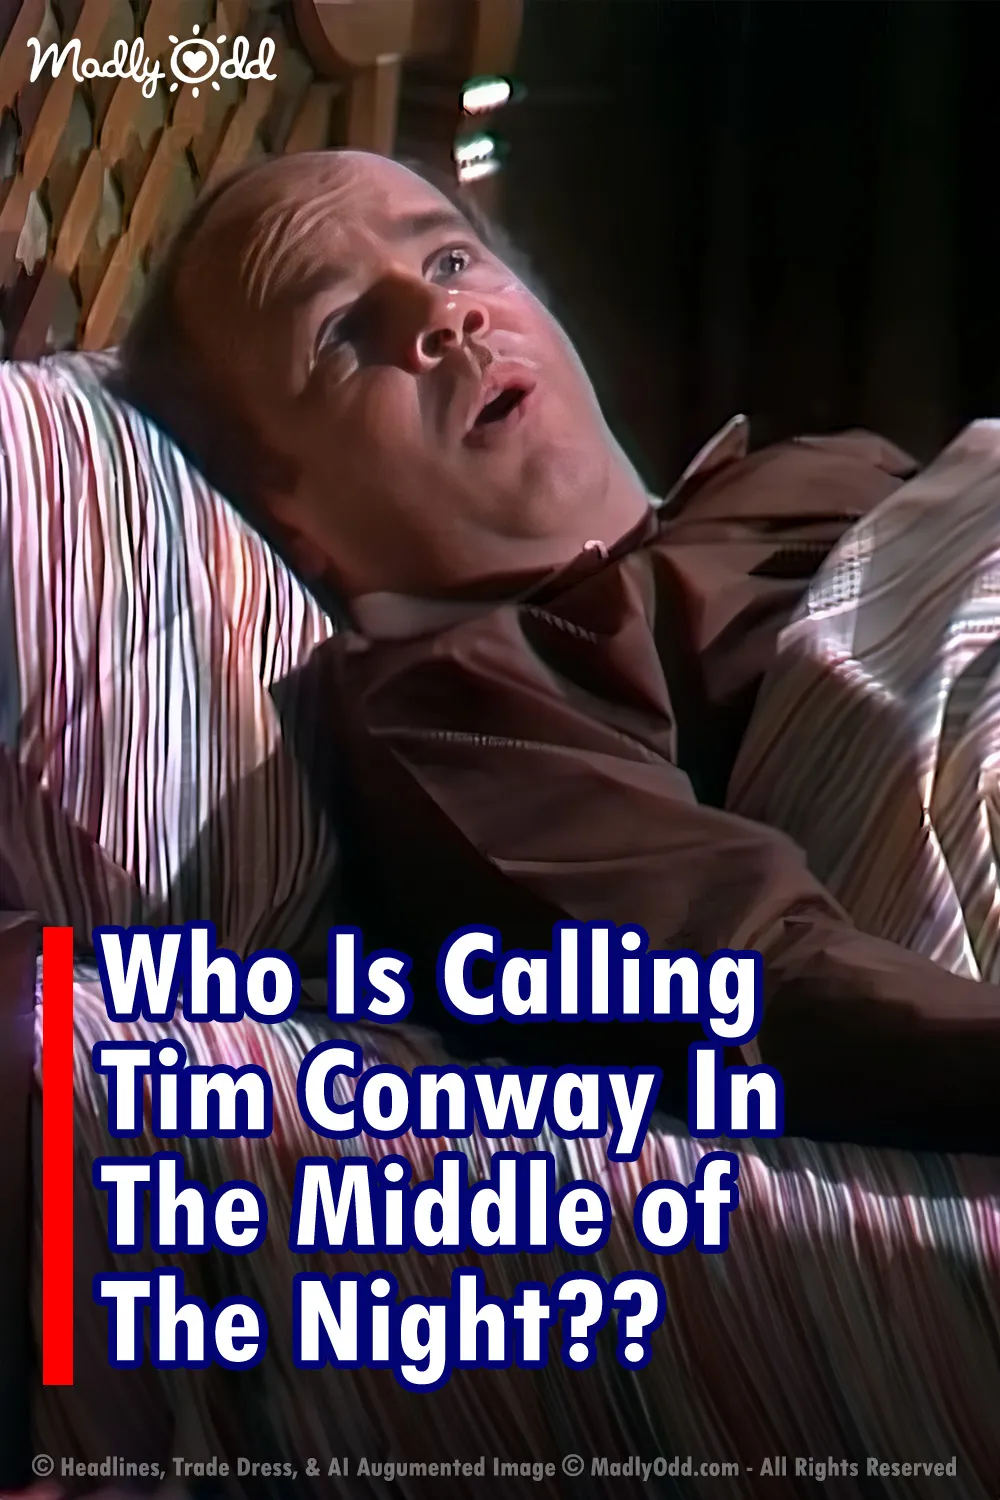 Bedtime Belly Laughs — Tim Conway\'s Hilarious Phone Skit